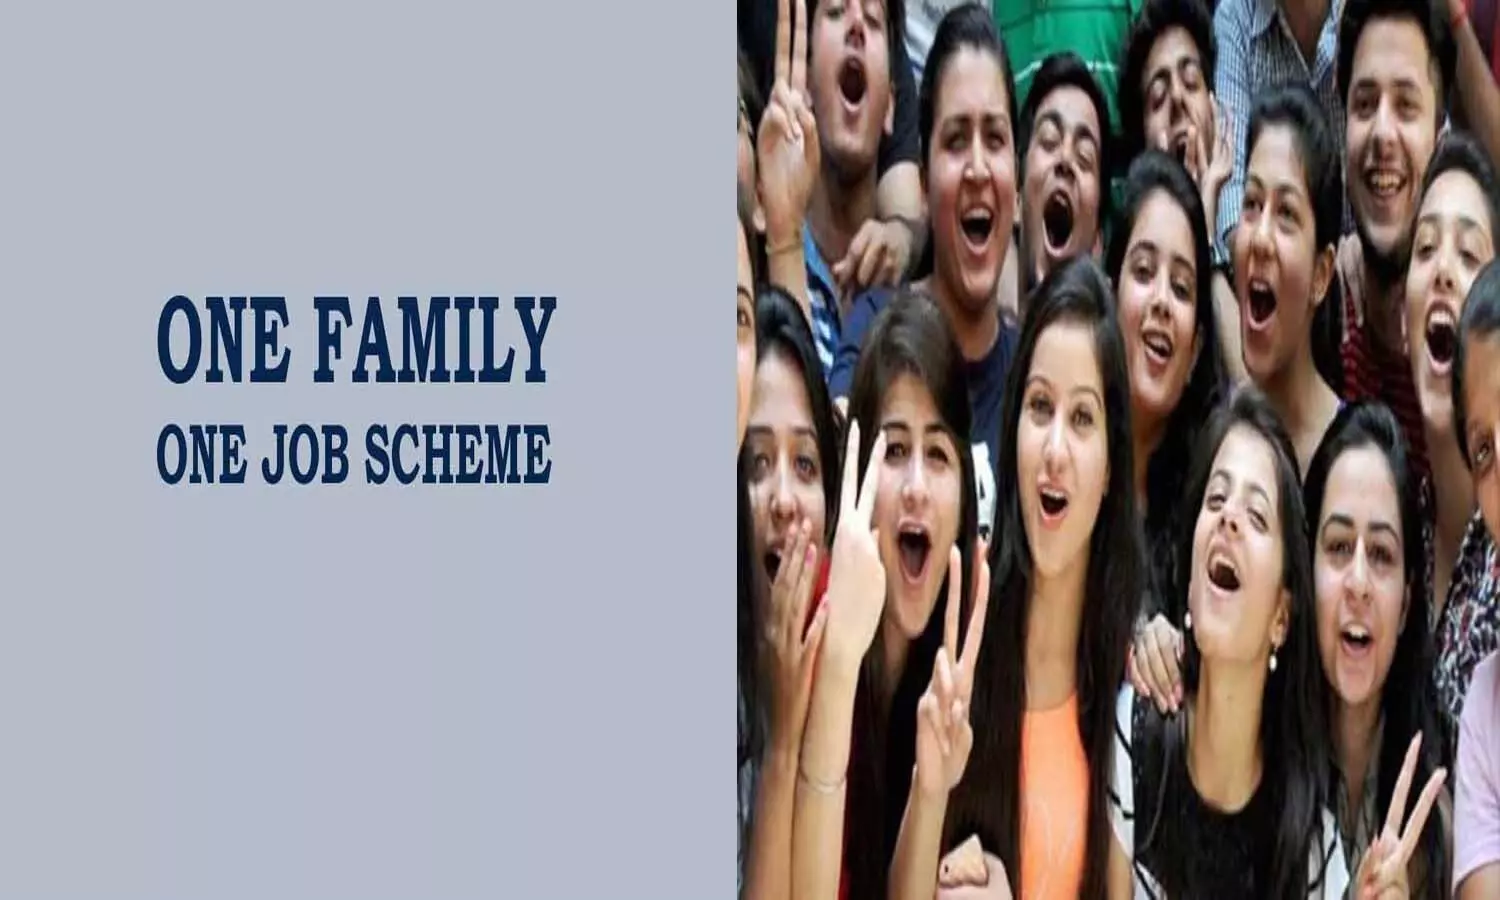 Under the one family one job scheme, the government will give a job to one person in every household? what is the truth